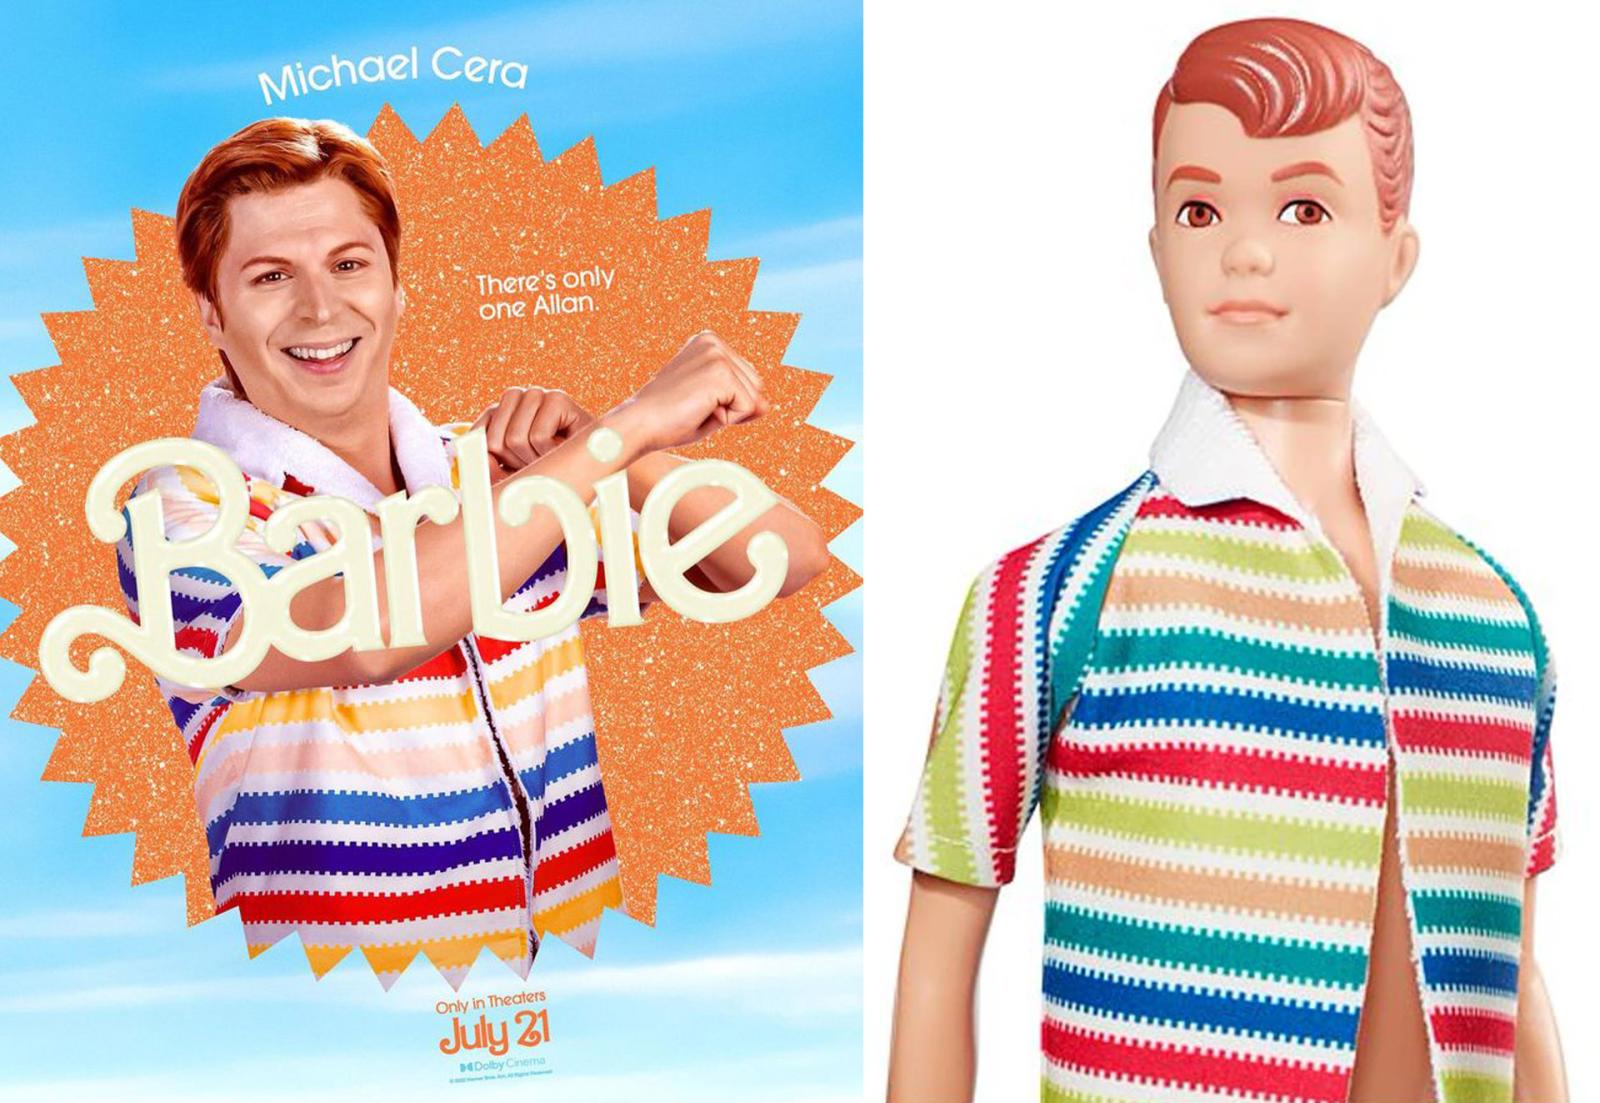 Cast of Barbie & Their Real-life Doll Counterparts: Resemblance is Uncanny - image 6